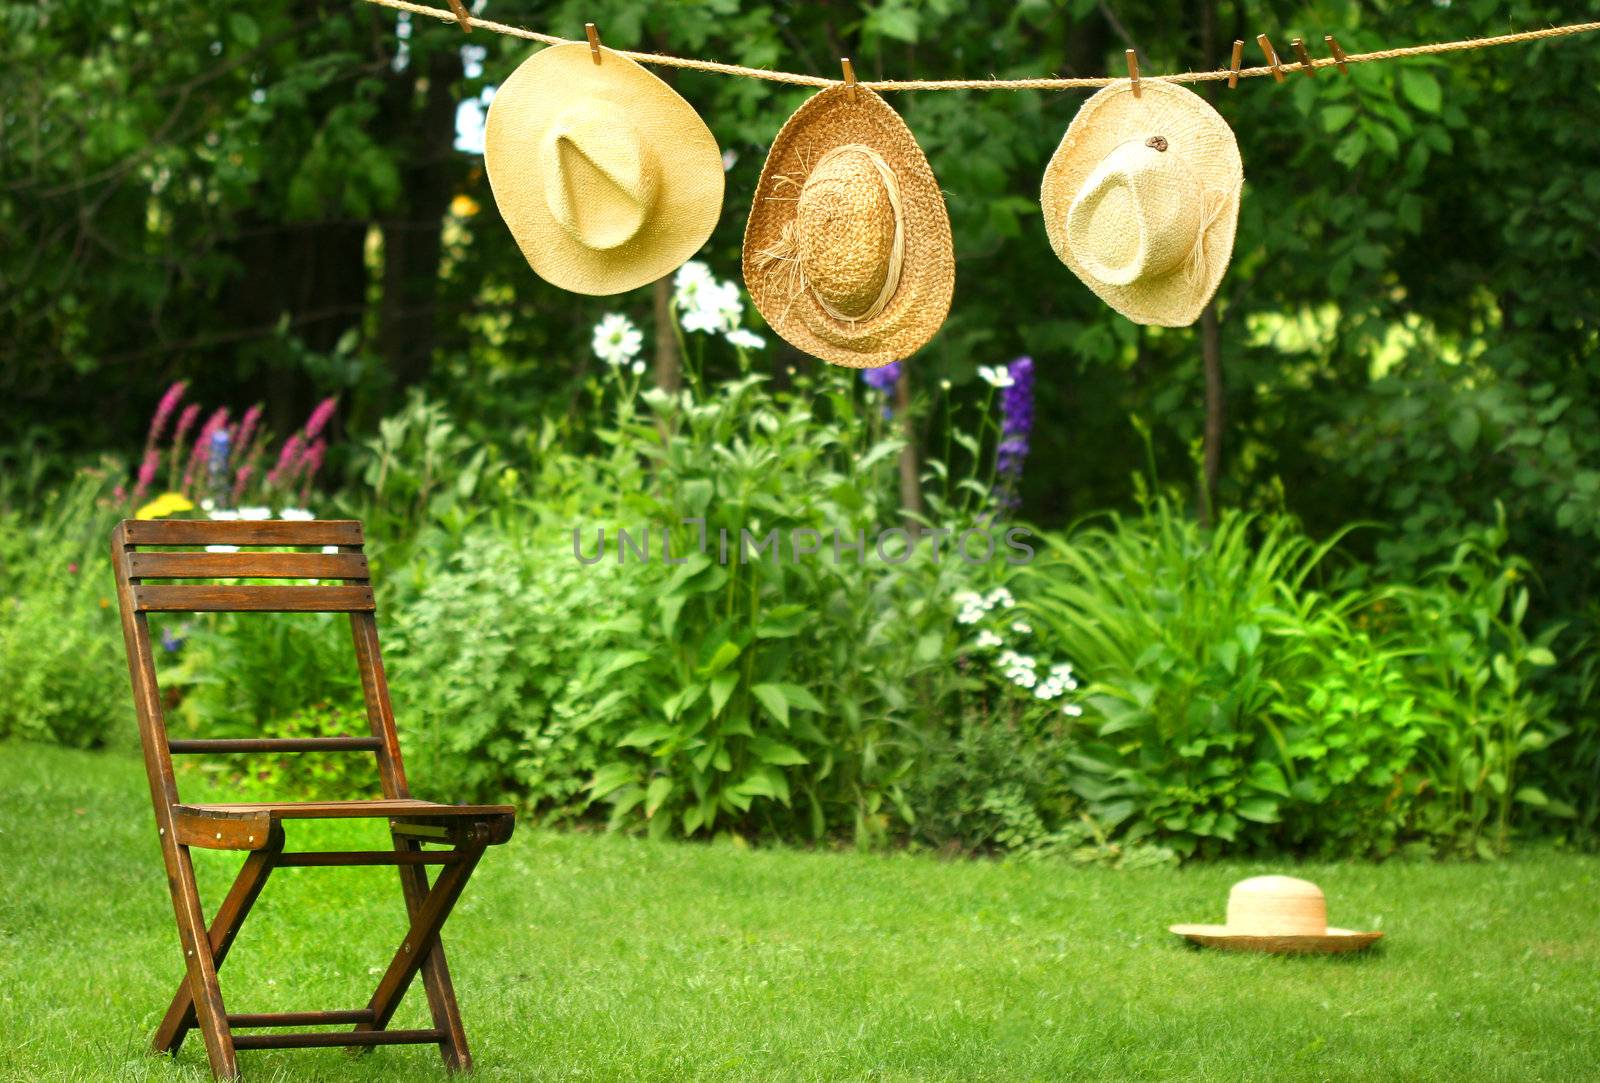 Straw hats on an old clothesline by Sandralise